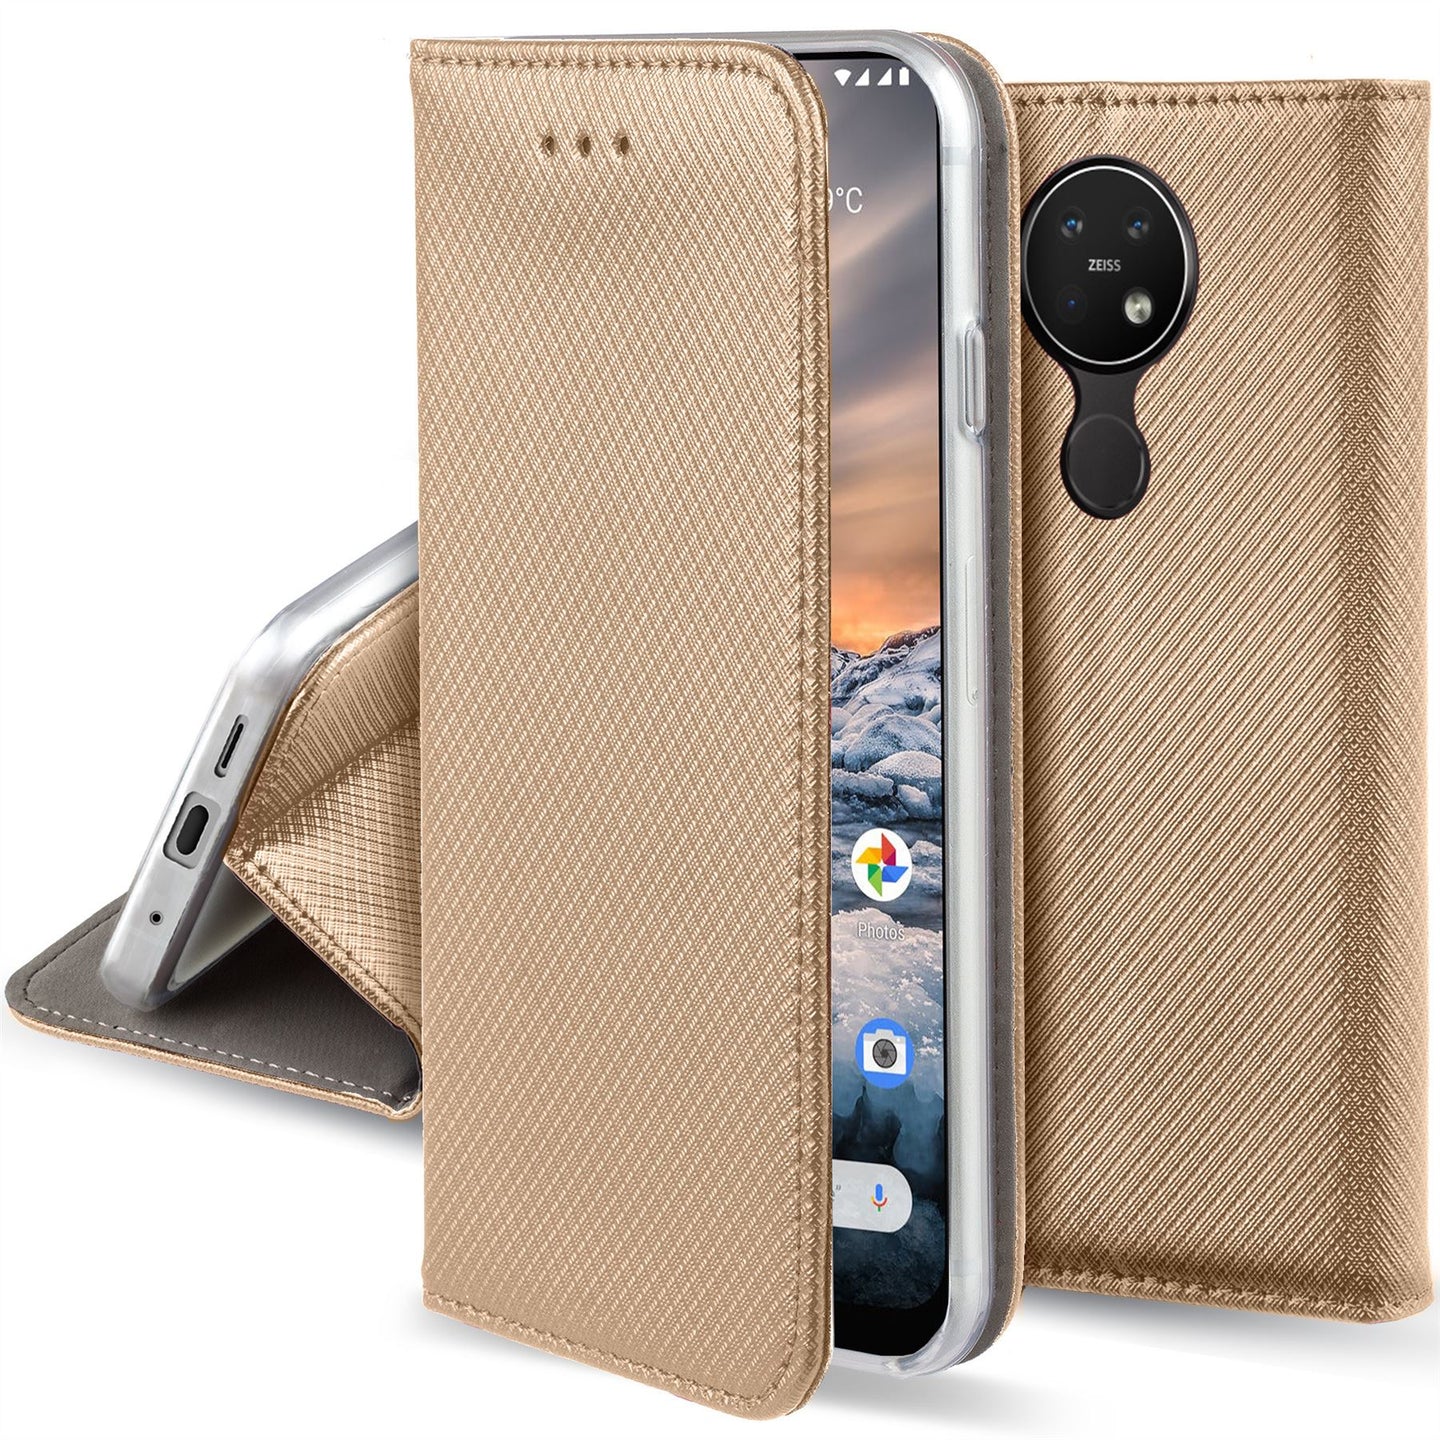 Moozy Case Flip Cover for Nokia 7.2, Nokia 6.2, Gold - Smart Magnetic Flip Case with Card Holder and Stand